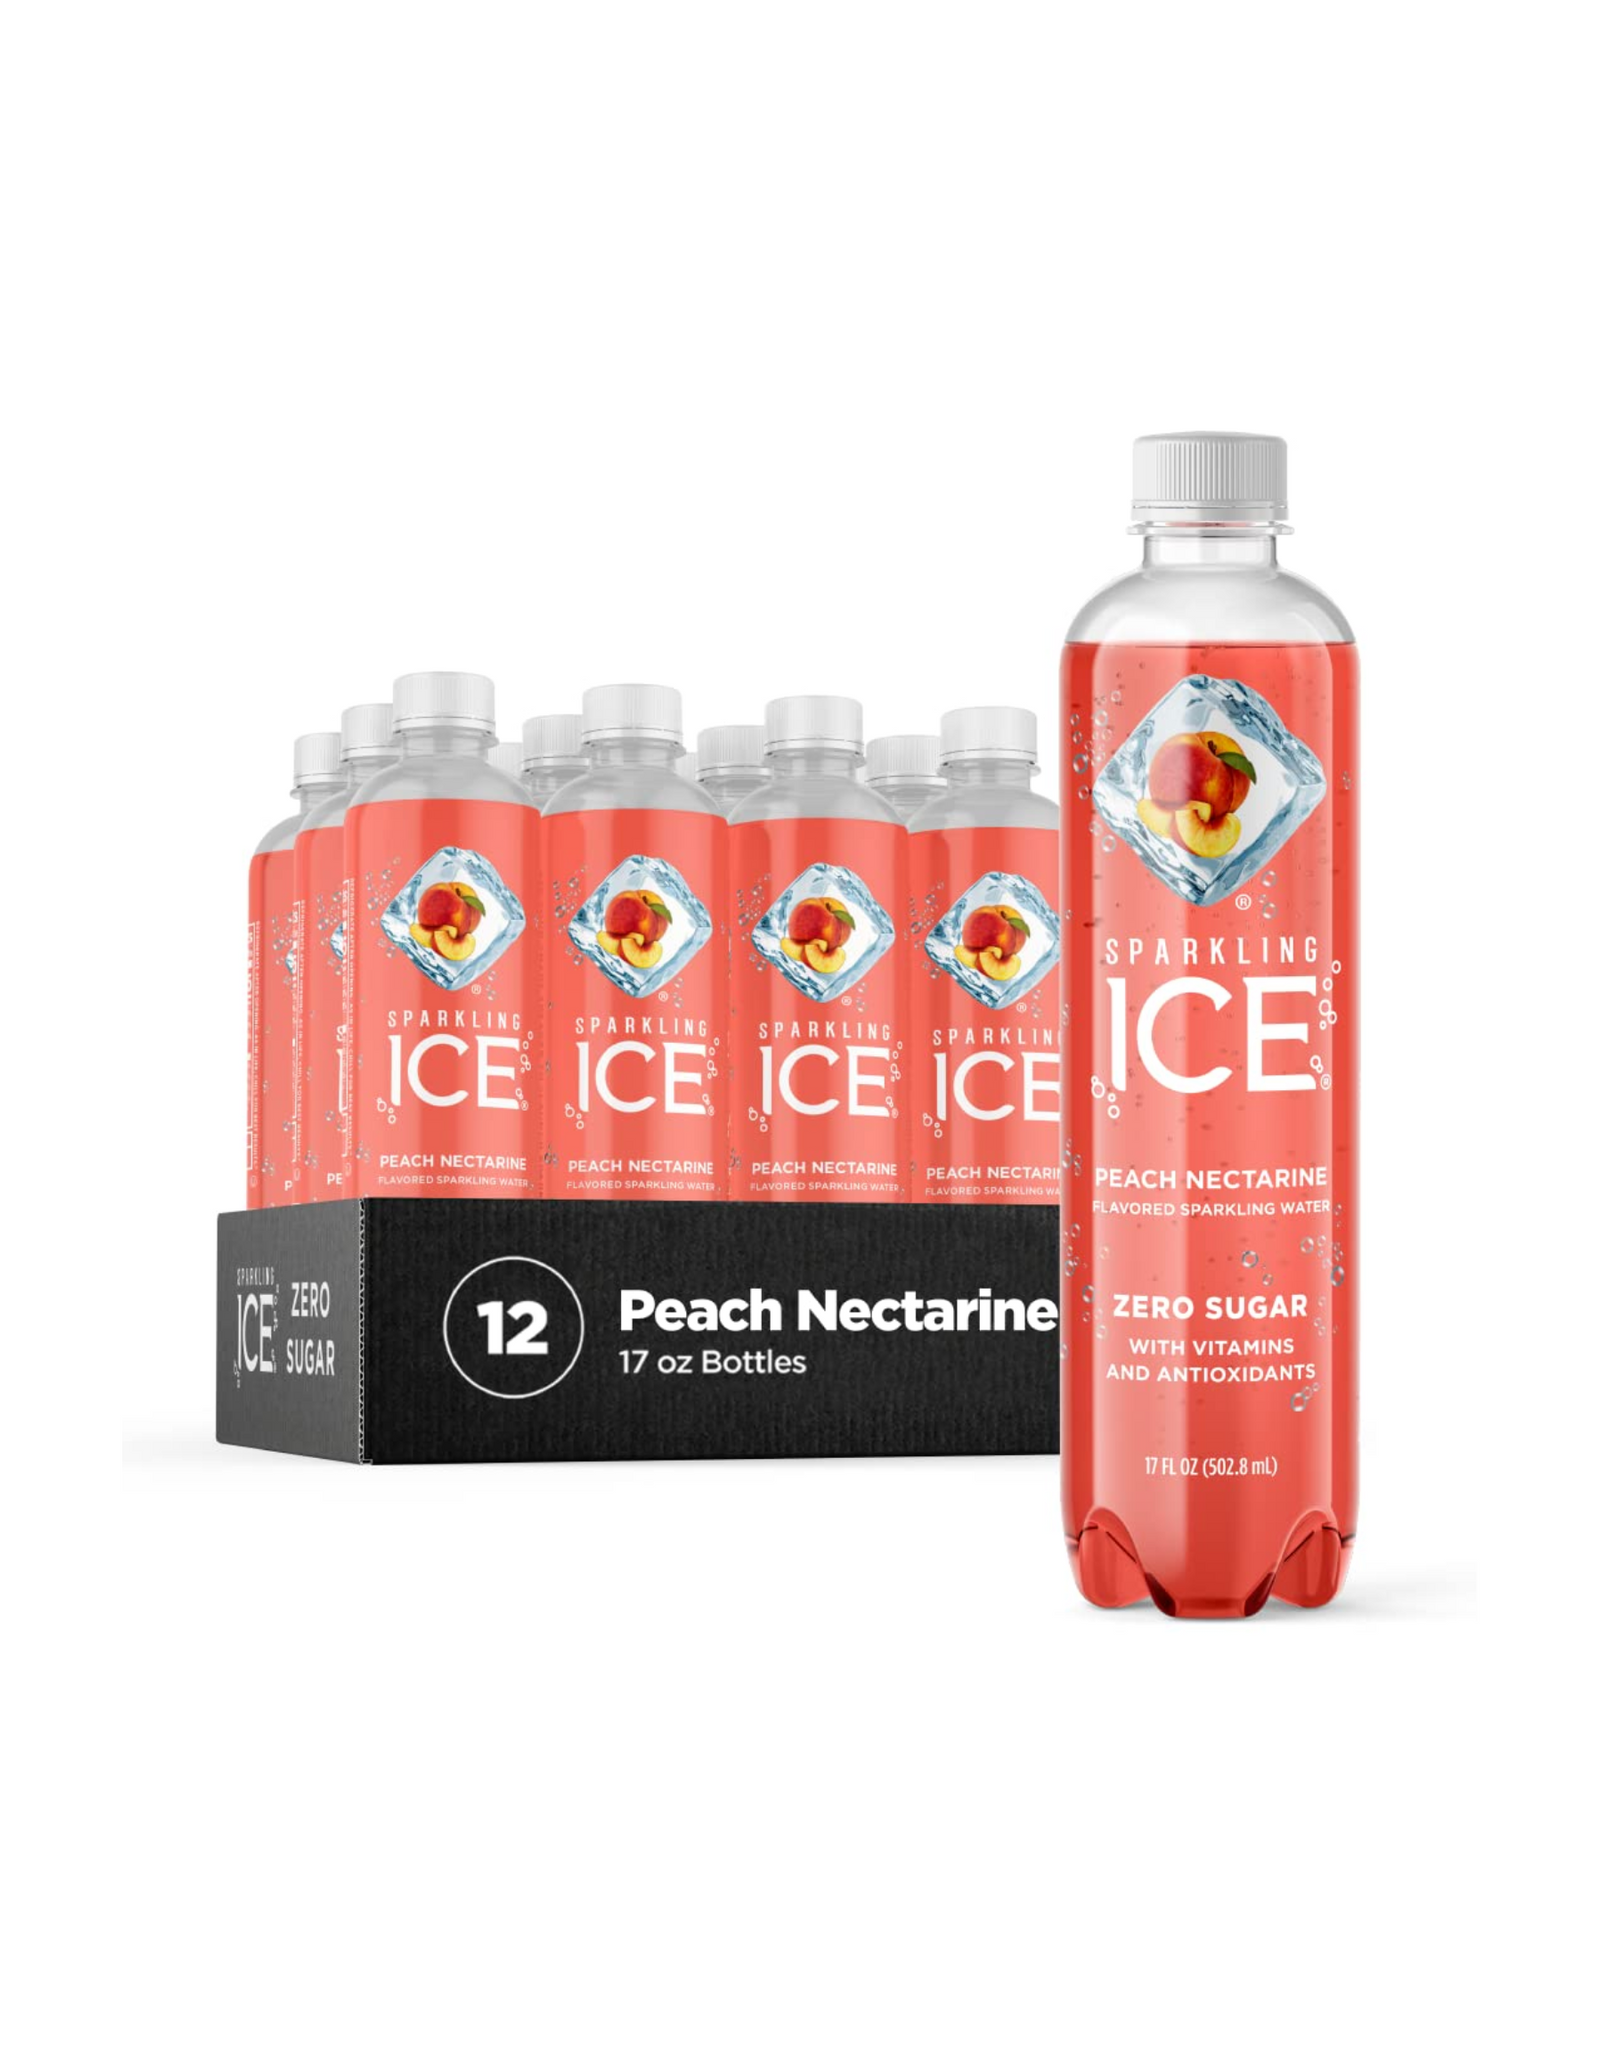 Sparkling Ice, Peach Nectarine Sparkling Water, with Vitamins and Antioxidants, 17 fl oz (Pack of 12)